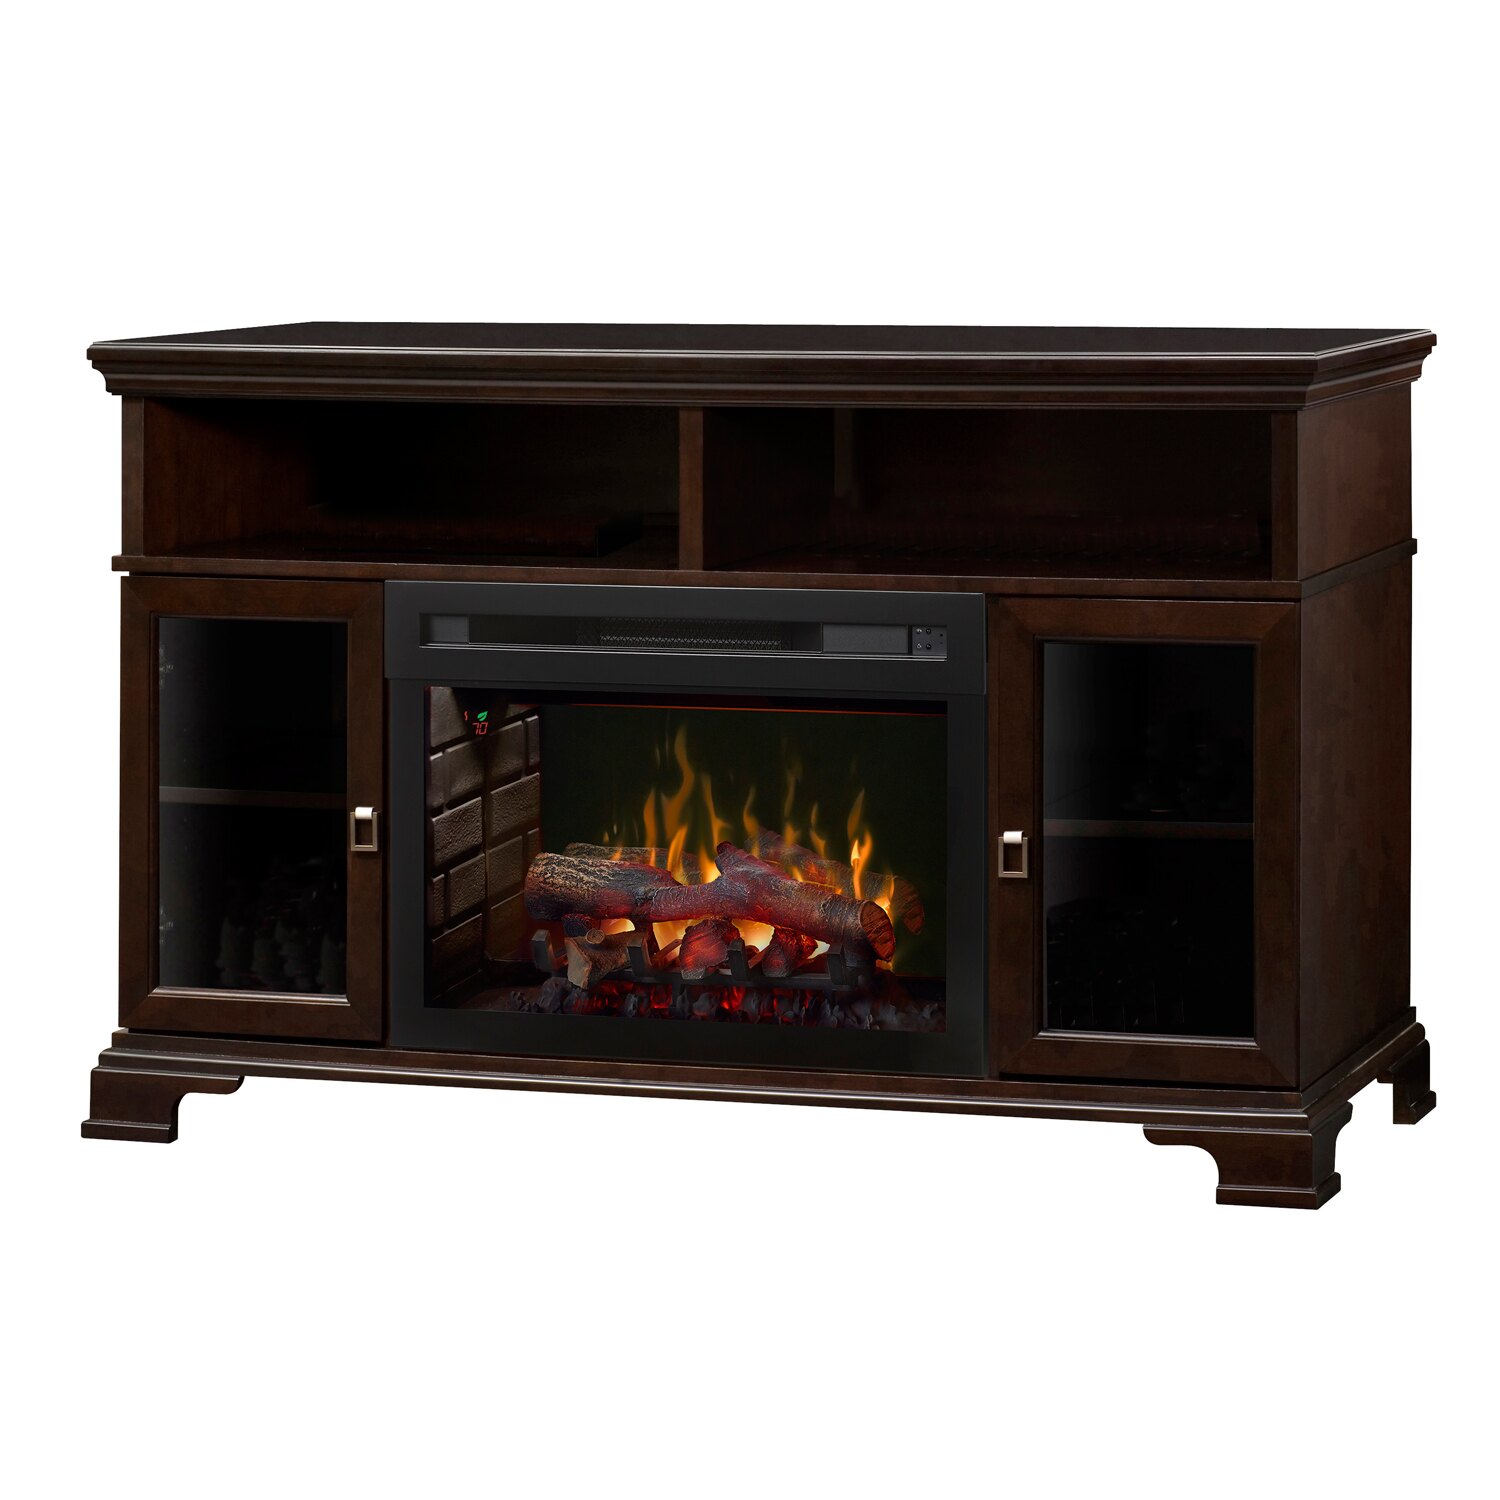 2 Sided Electric Fireplace Luxury Dimplex Electric Fireplace Brookings with Logs Espresso